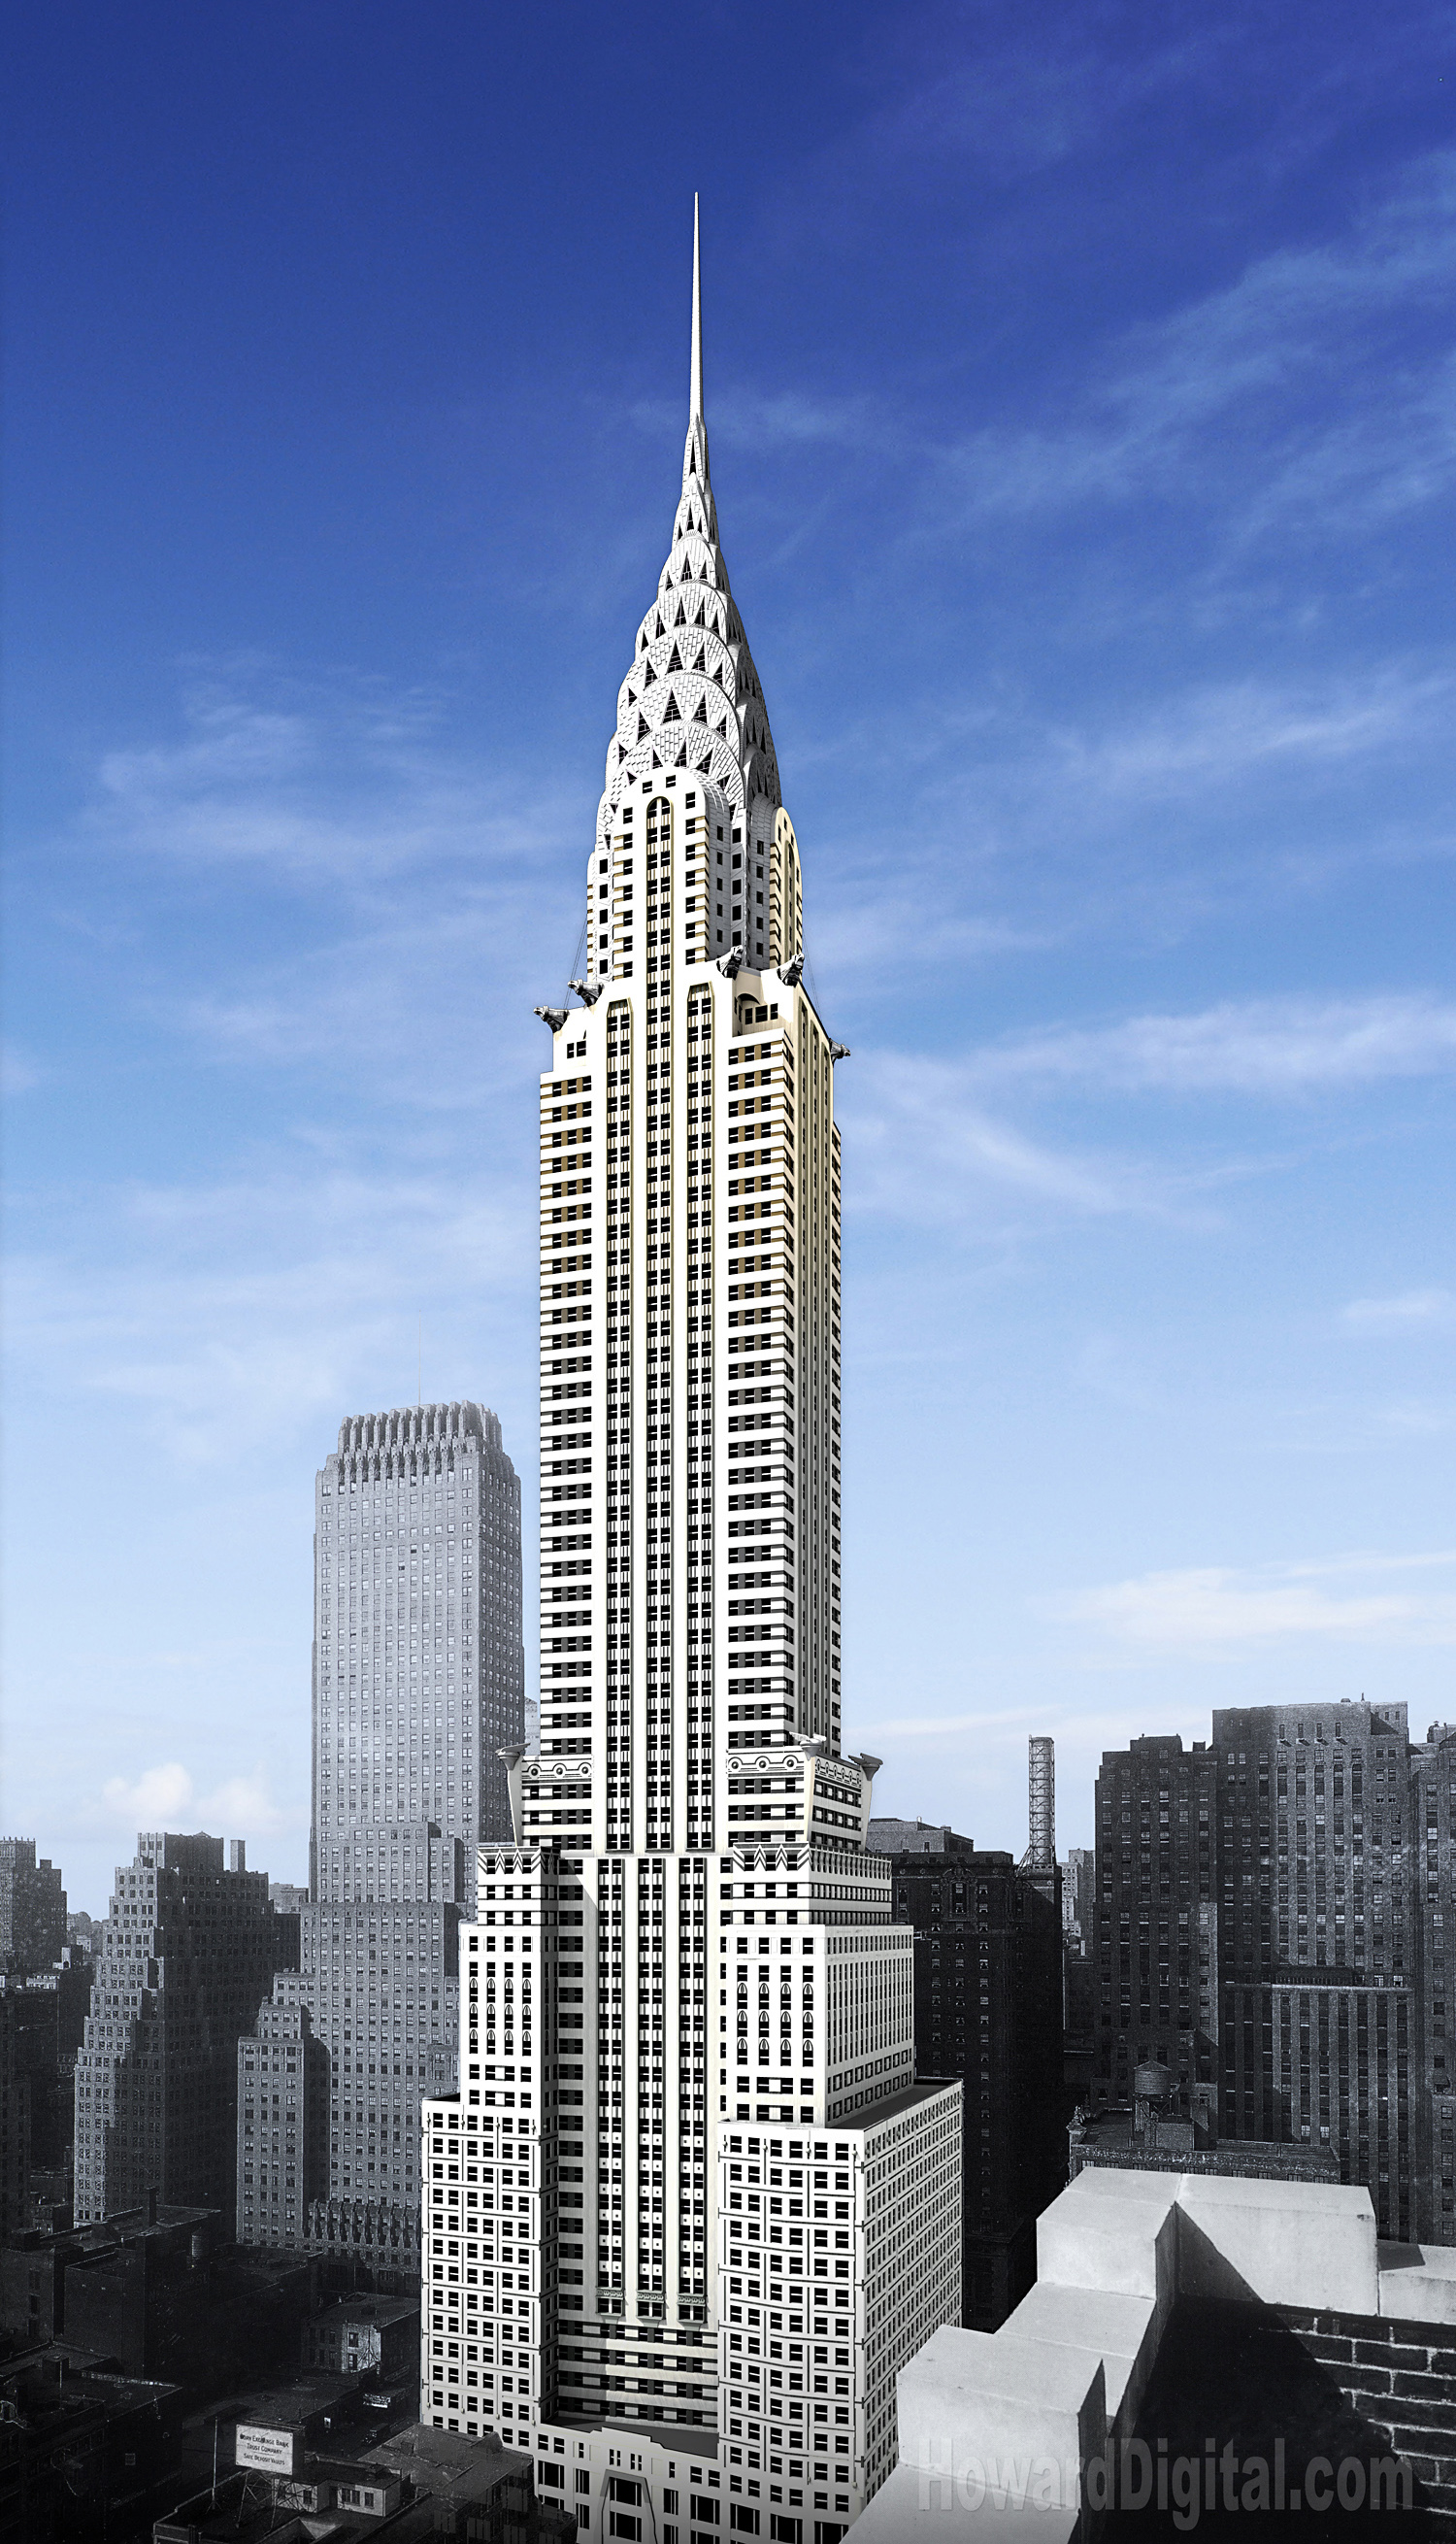 How tall is the chrysler building in new york #3